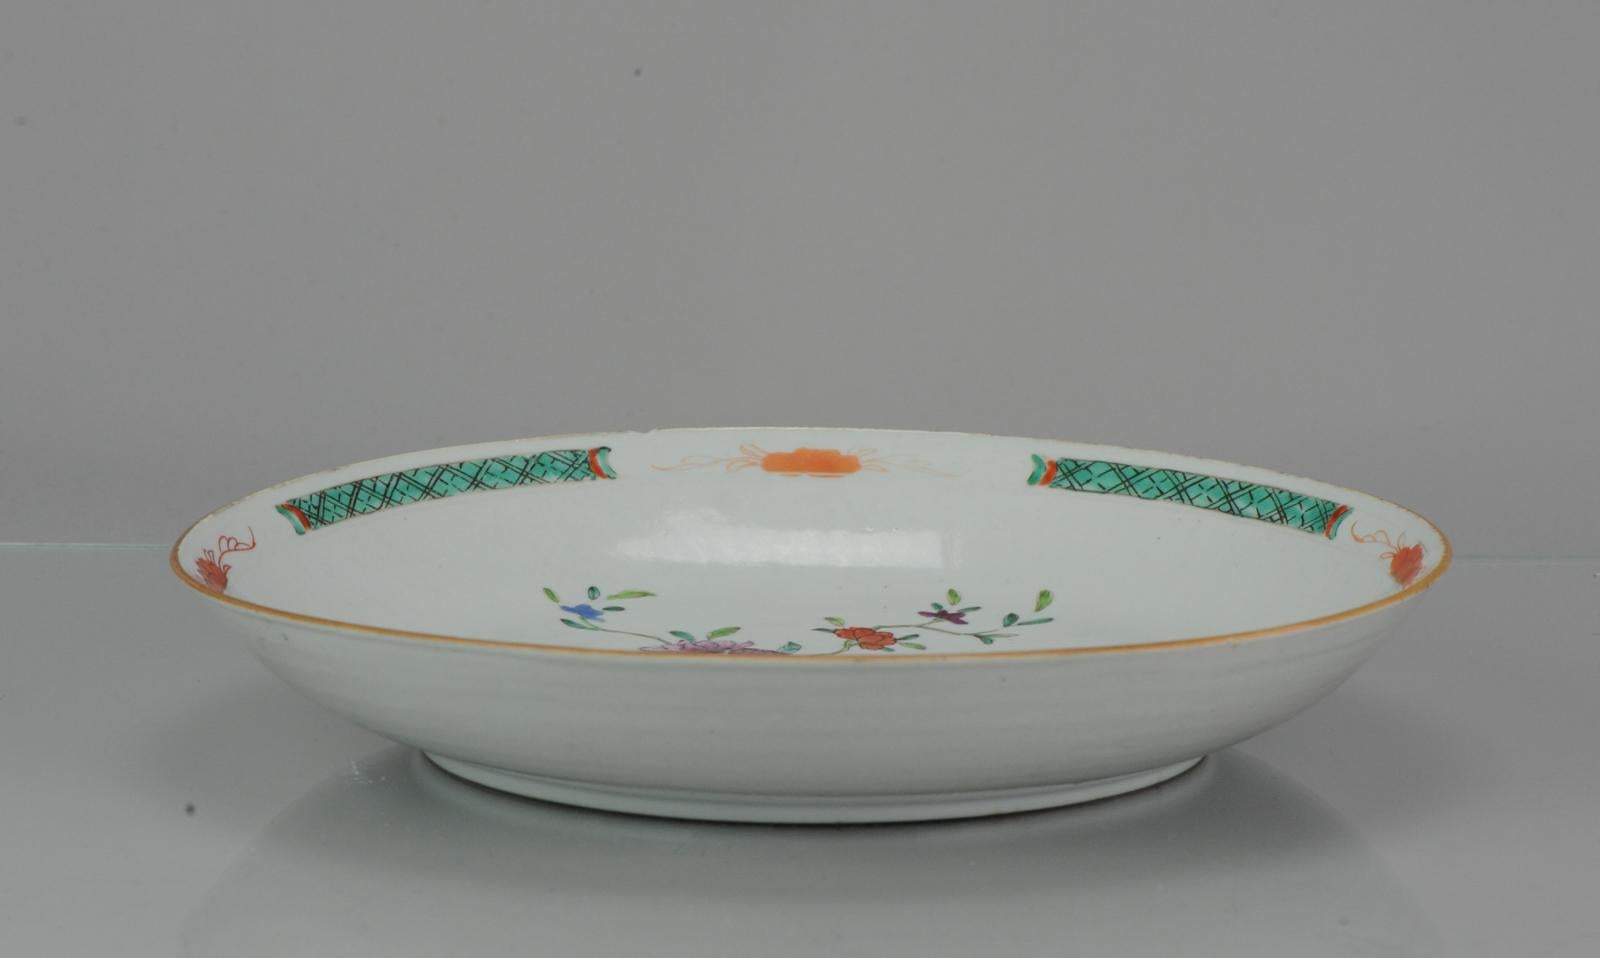 Lovely Chinese Porcelain Famille Rose Charger with nice green, red, blue and pink enamels.

We think it could be a pre Bencharong / Pre Nyonya plate/charger. We call this style Pre Bencharong because it has many features of later bencharong / south